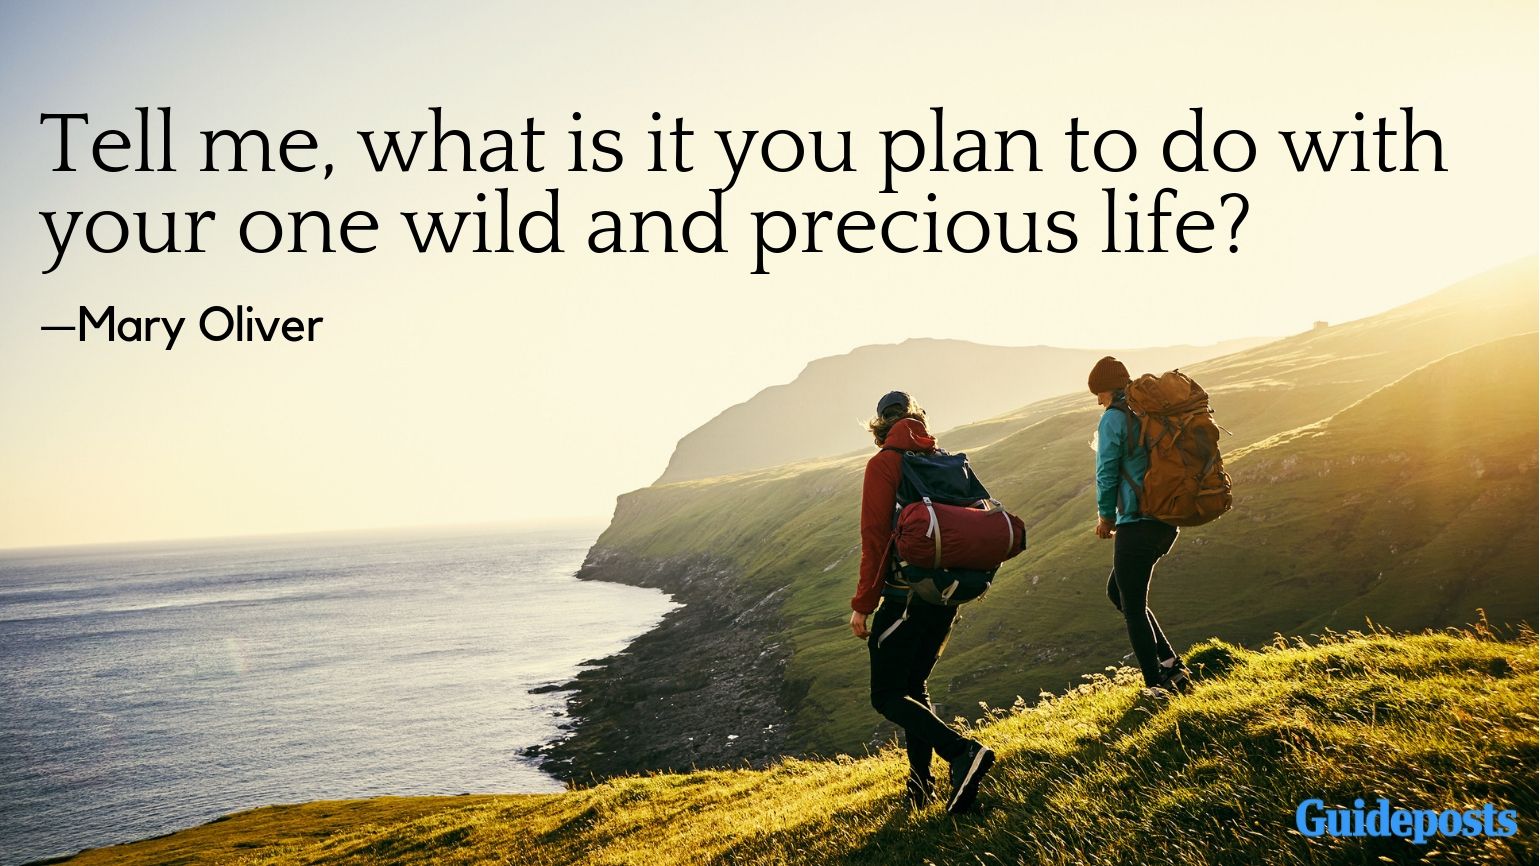 Tell me, what is it you plan to do with your one wild and precious life?